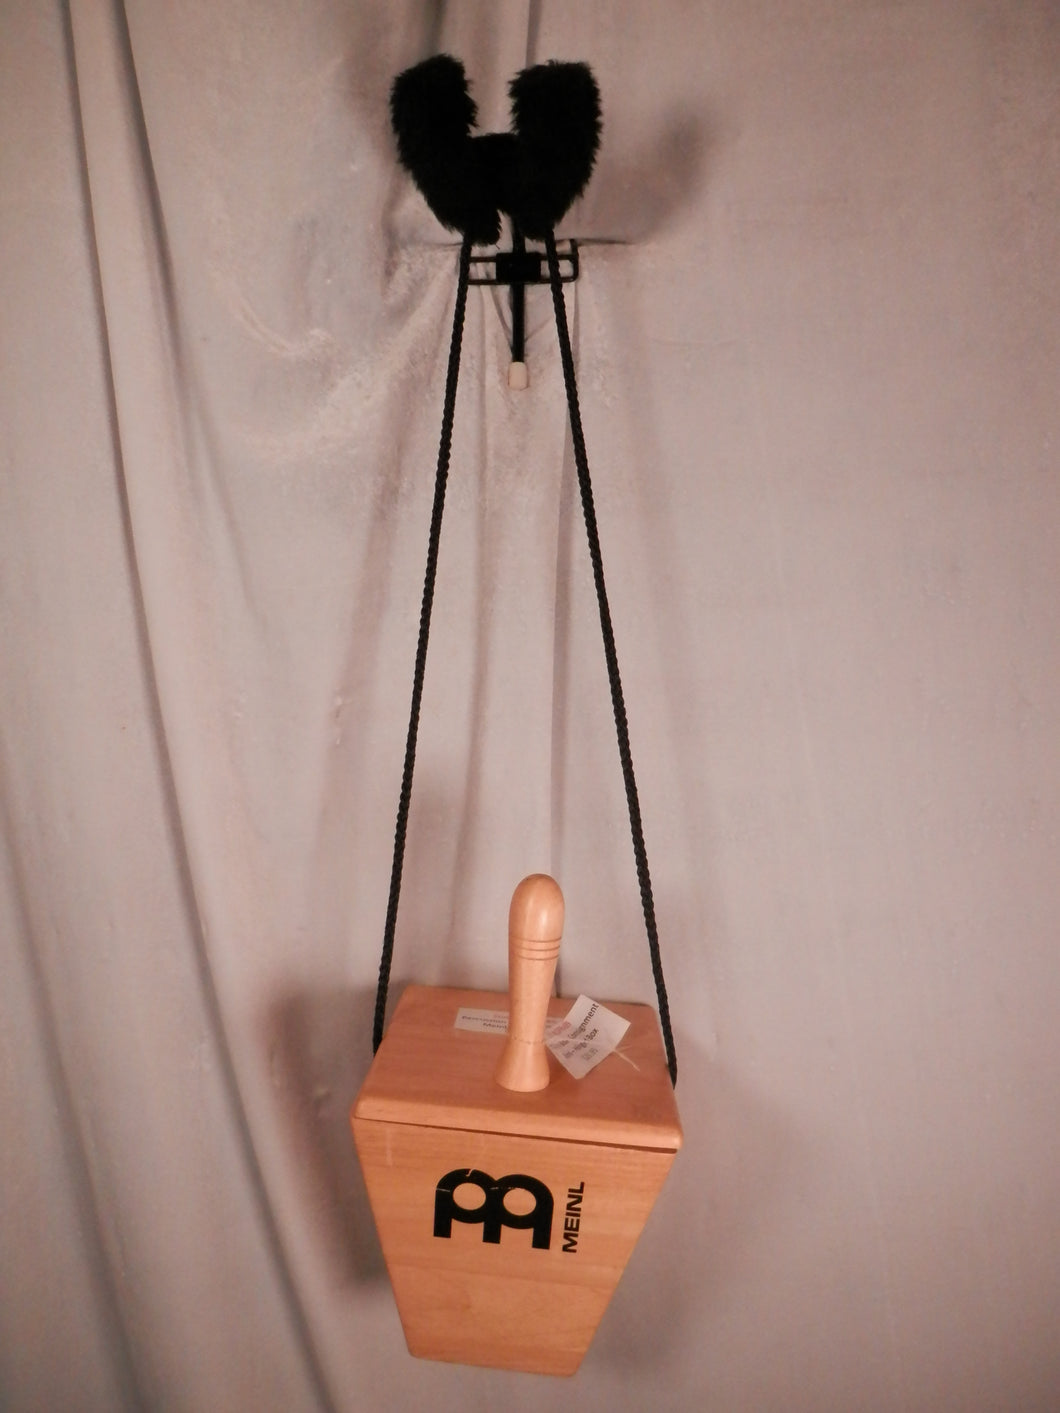 Meinl AA Percussion Box on String Hinged Box used